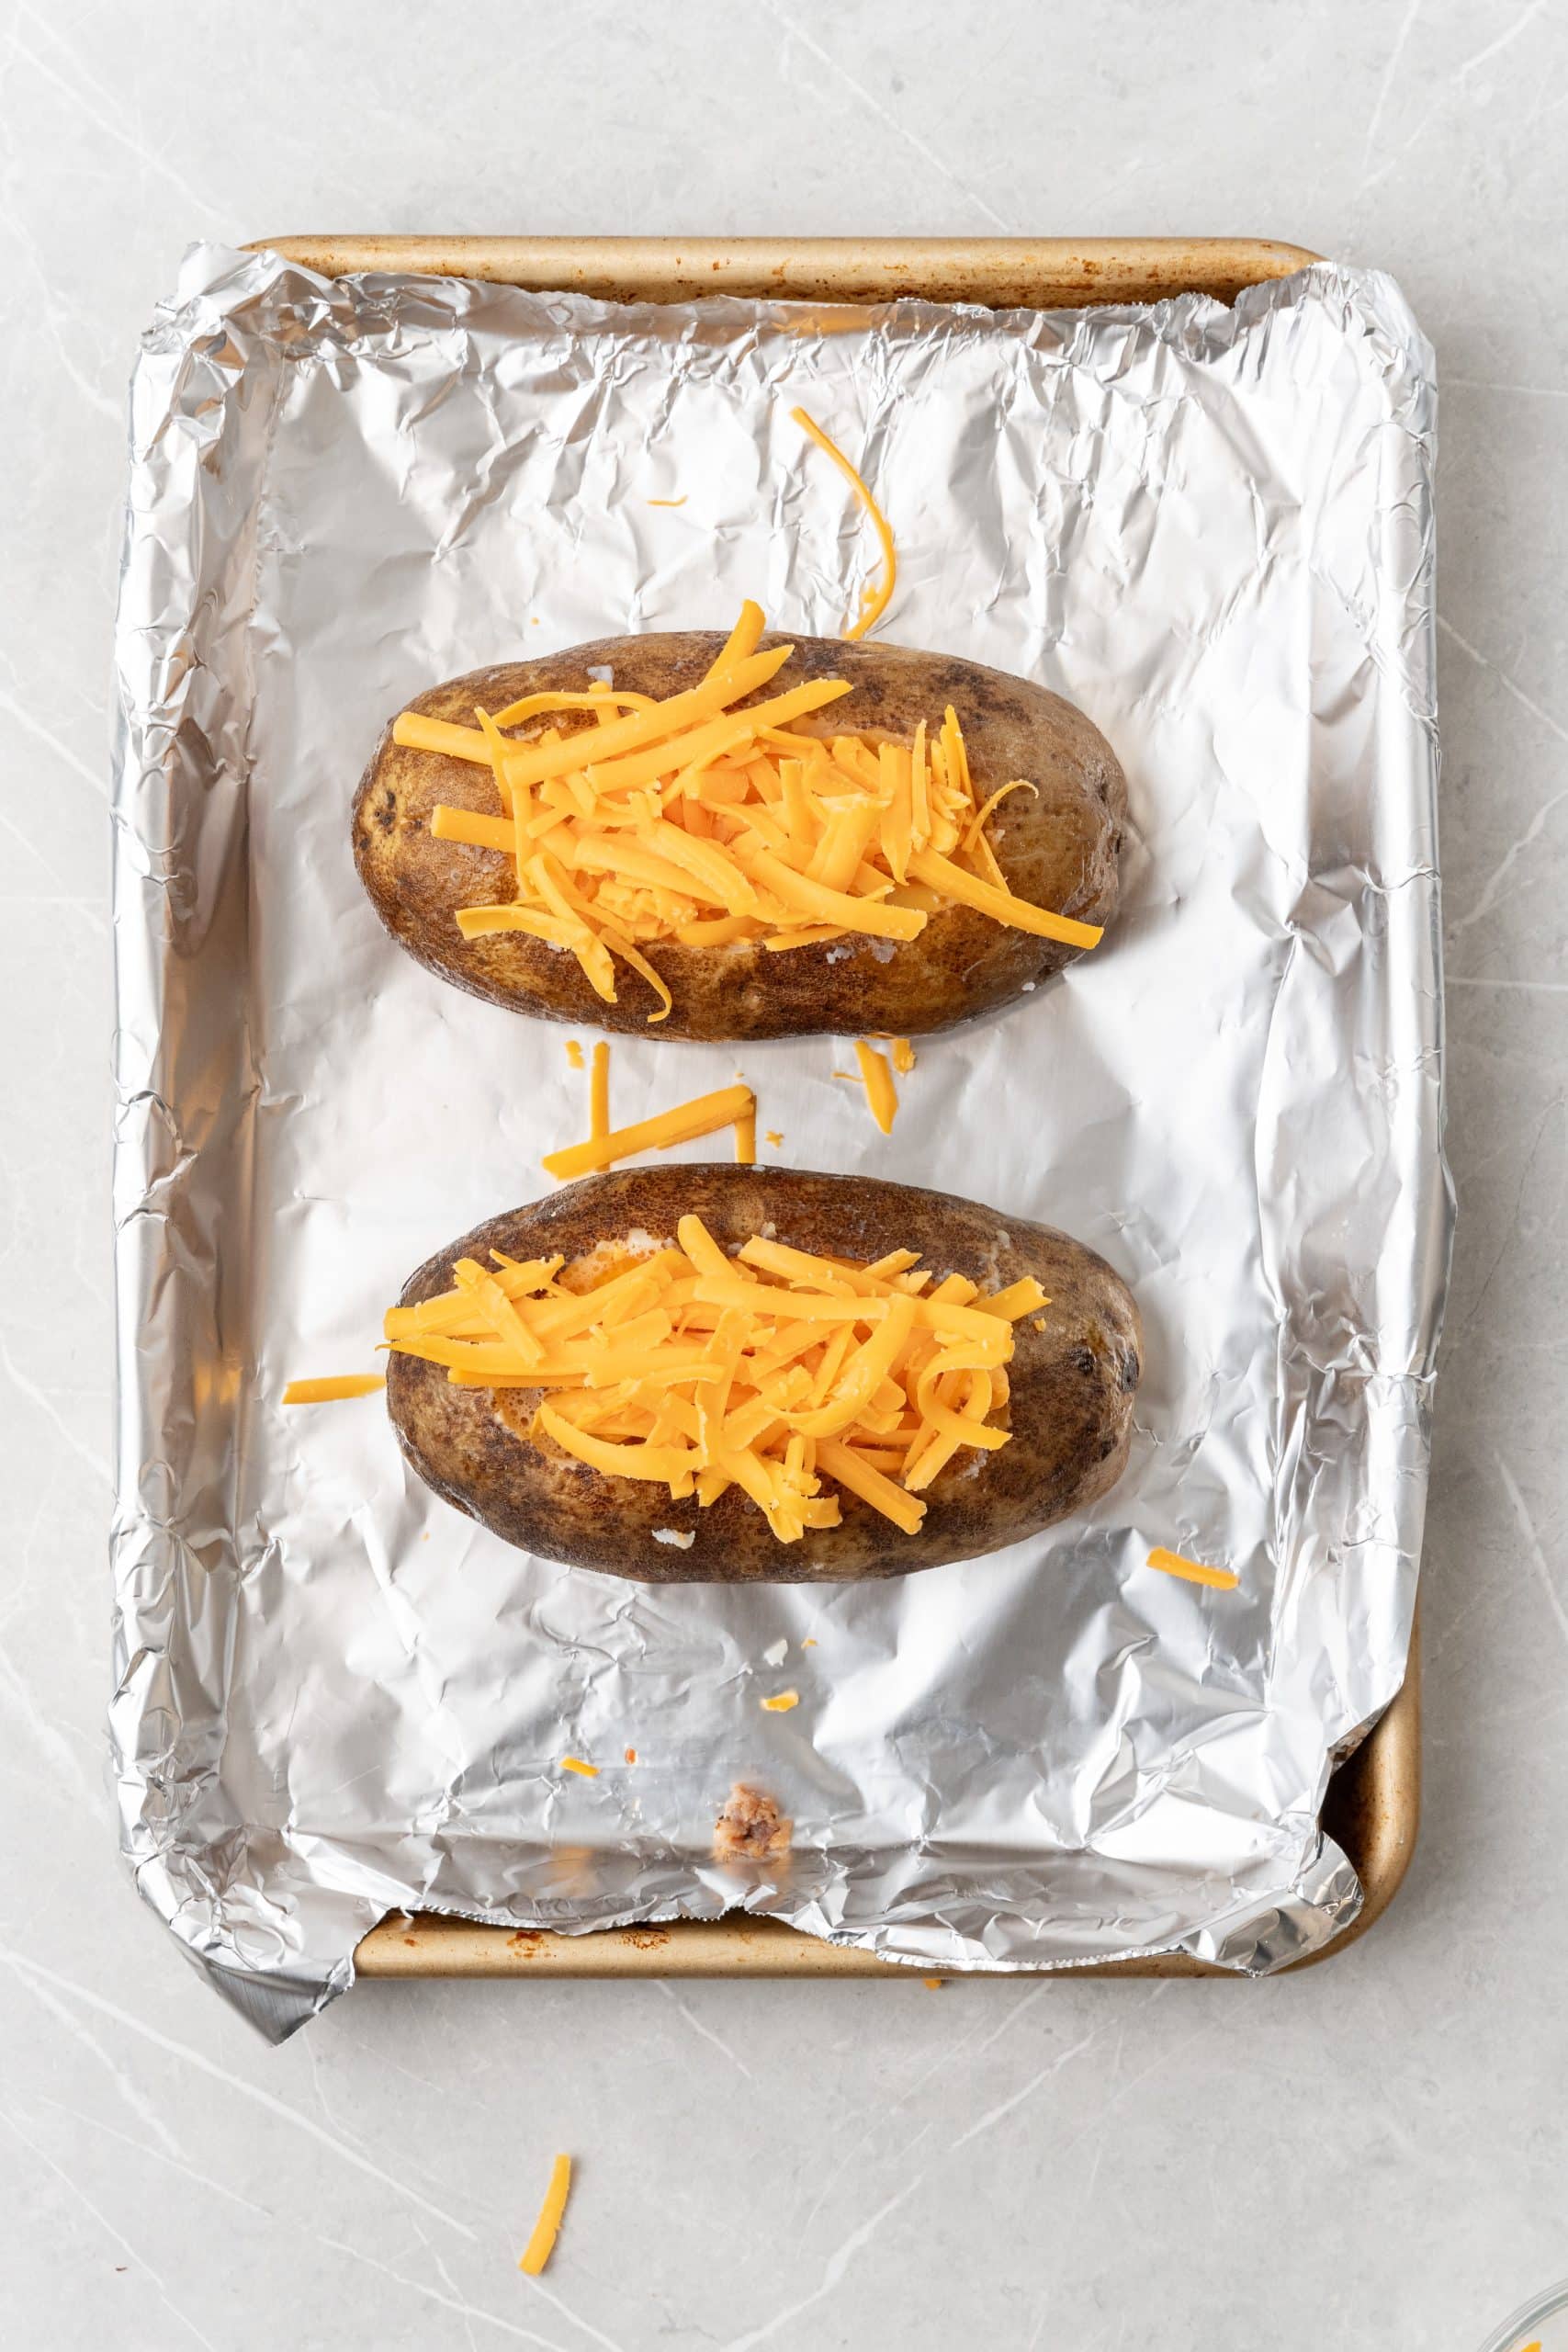 shredded cheese topped breakfast baked potatoes on a foil lined baking sheet